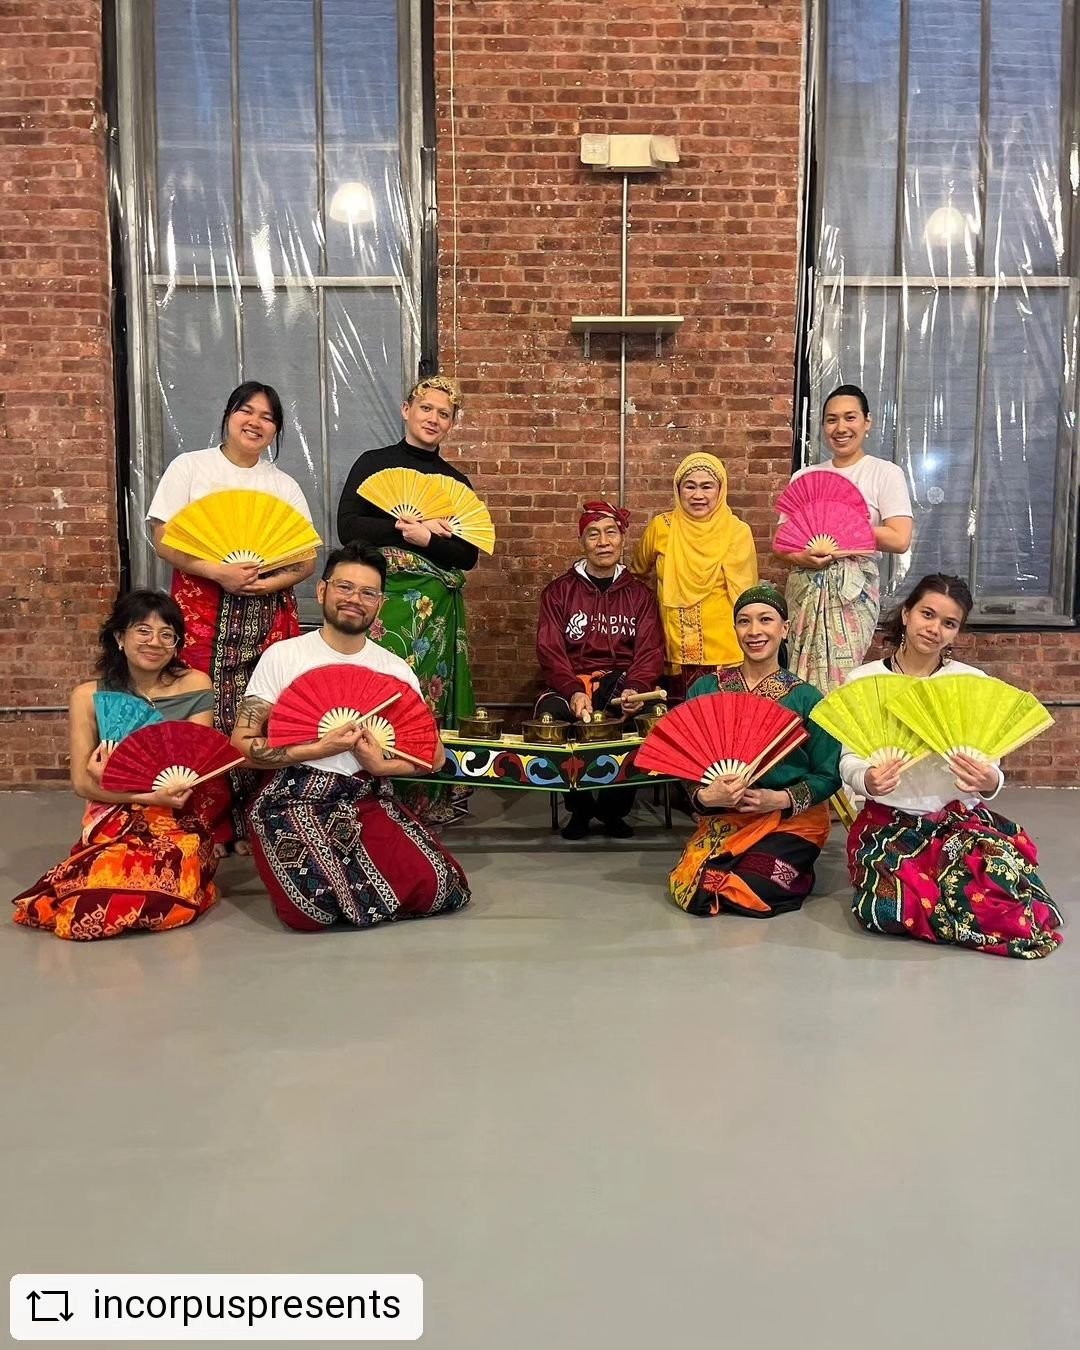 #REPOST @incorpuspresents
Maraming salamat po to Potri Ranka Manis and @kindingsindaw! Our Mindanao Dances workshop left participants feeling &ldquo;grounded,&rdquo; &ldquo;intentional,&rdquo; and &ldquo;tranquil.&rdquo; 
To learn more, join our May 